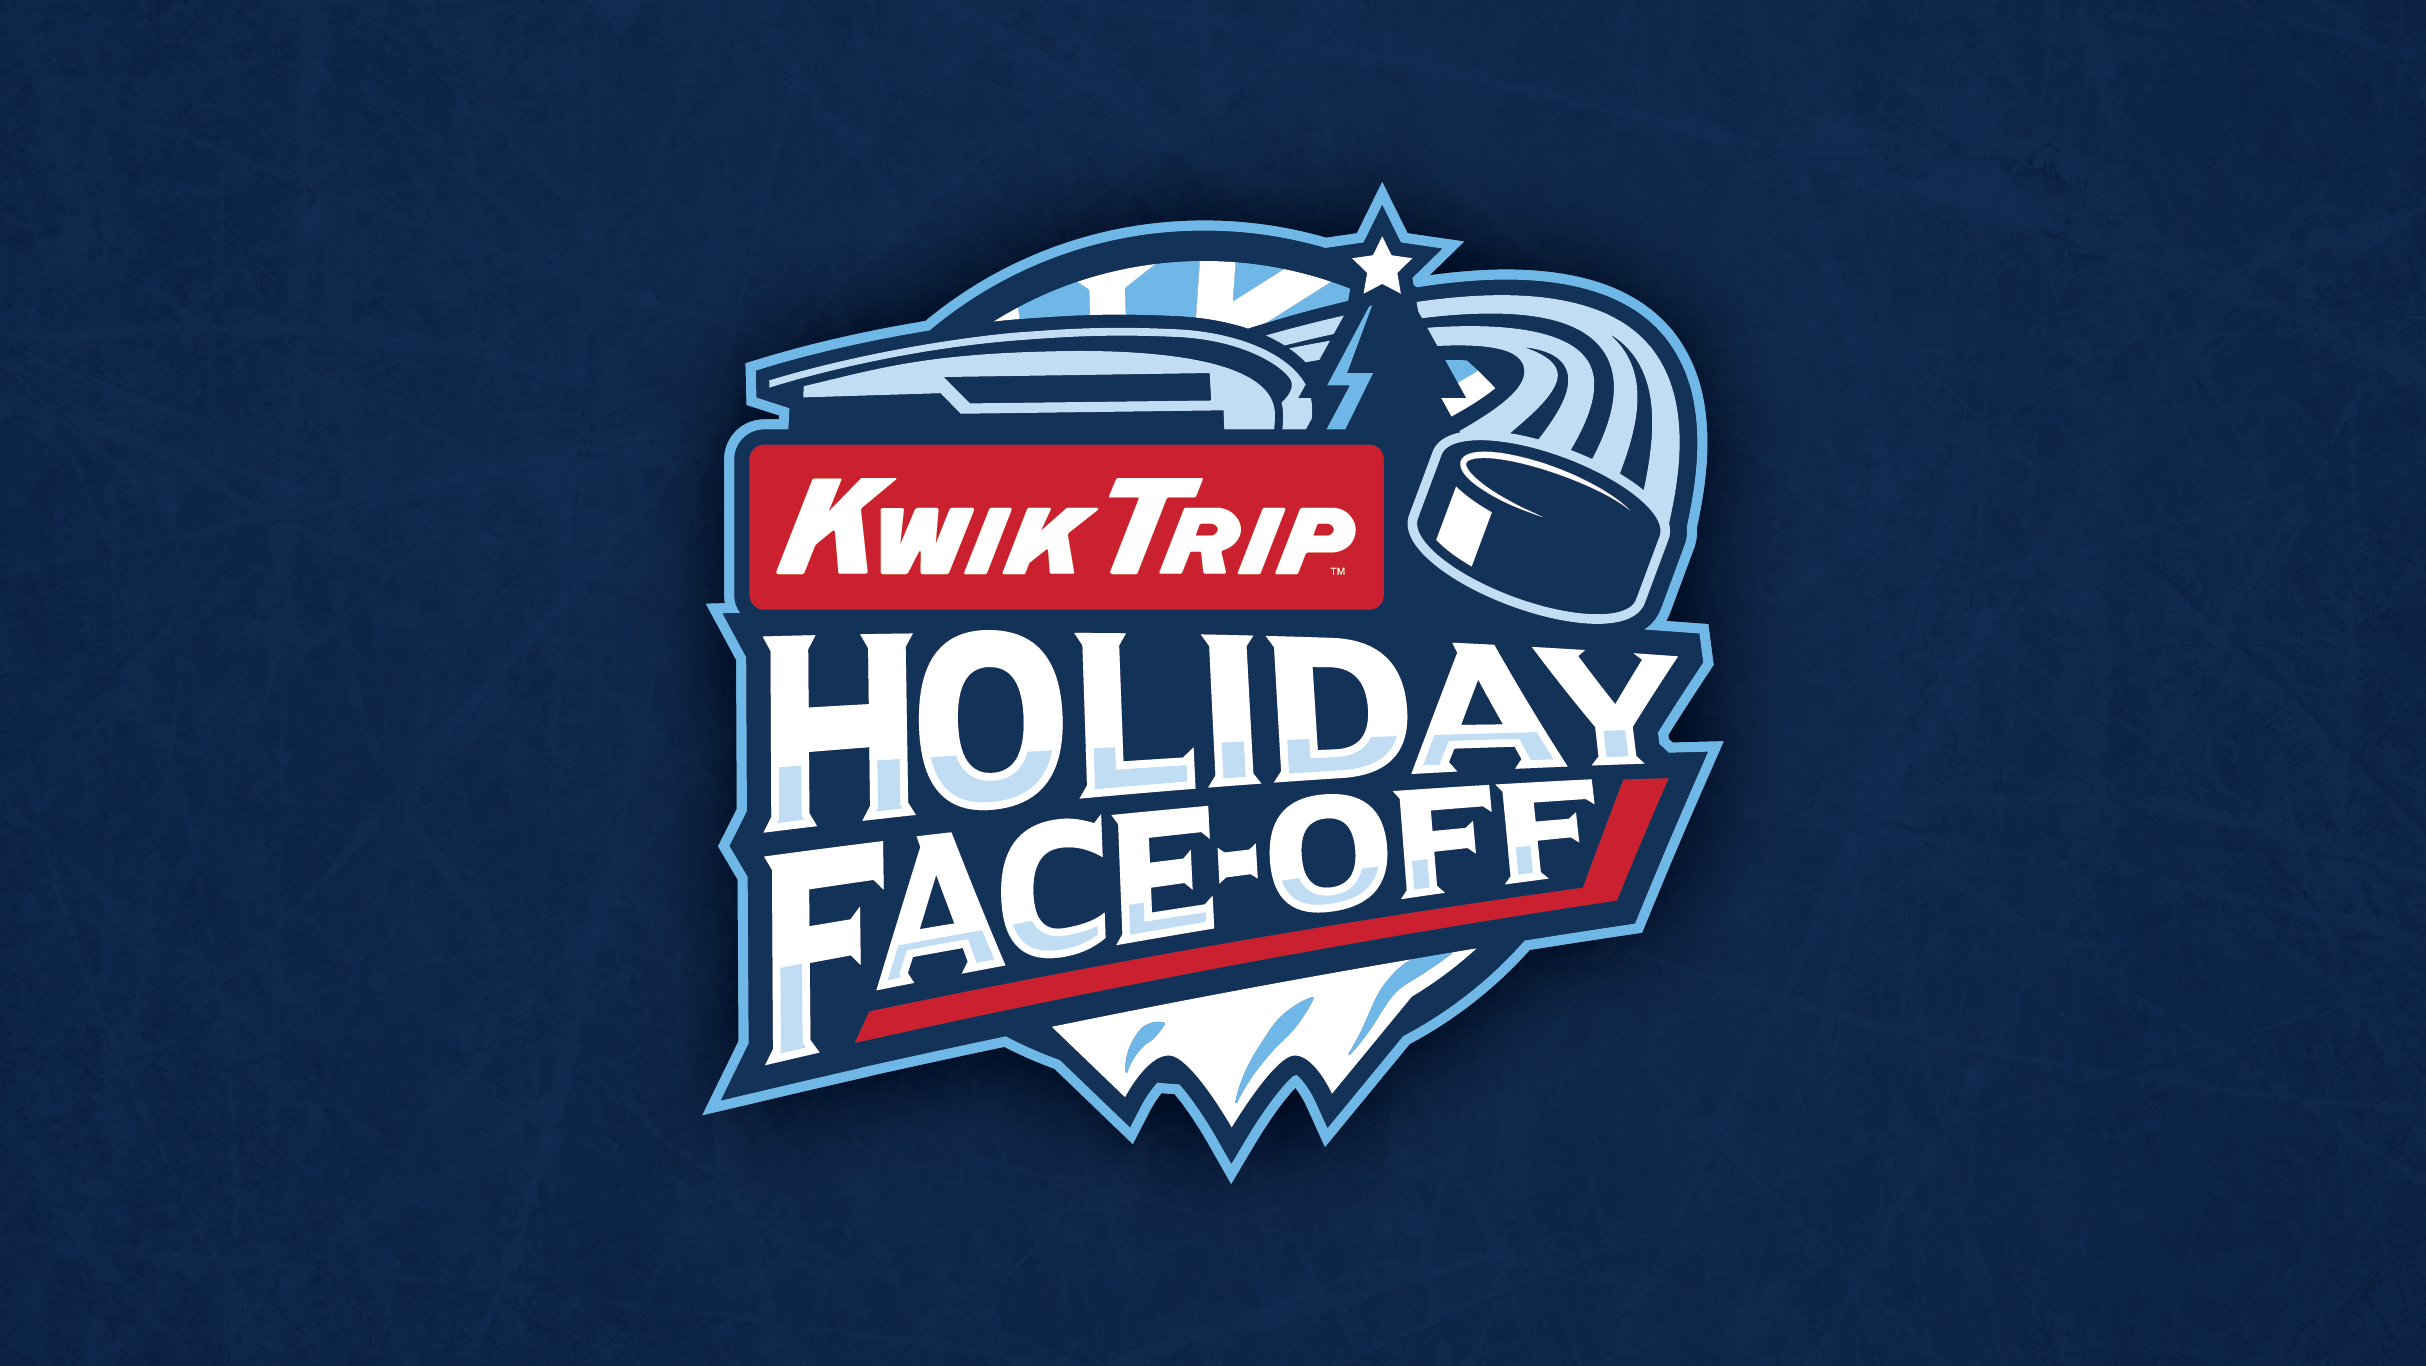 Kwik Trip Holiday Face-Off pre-sale passcode